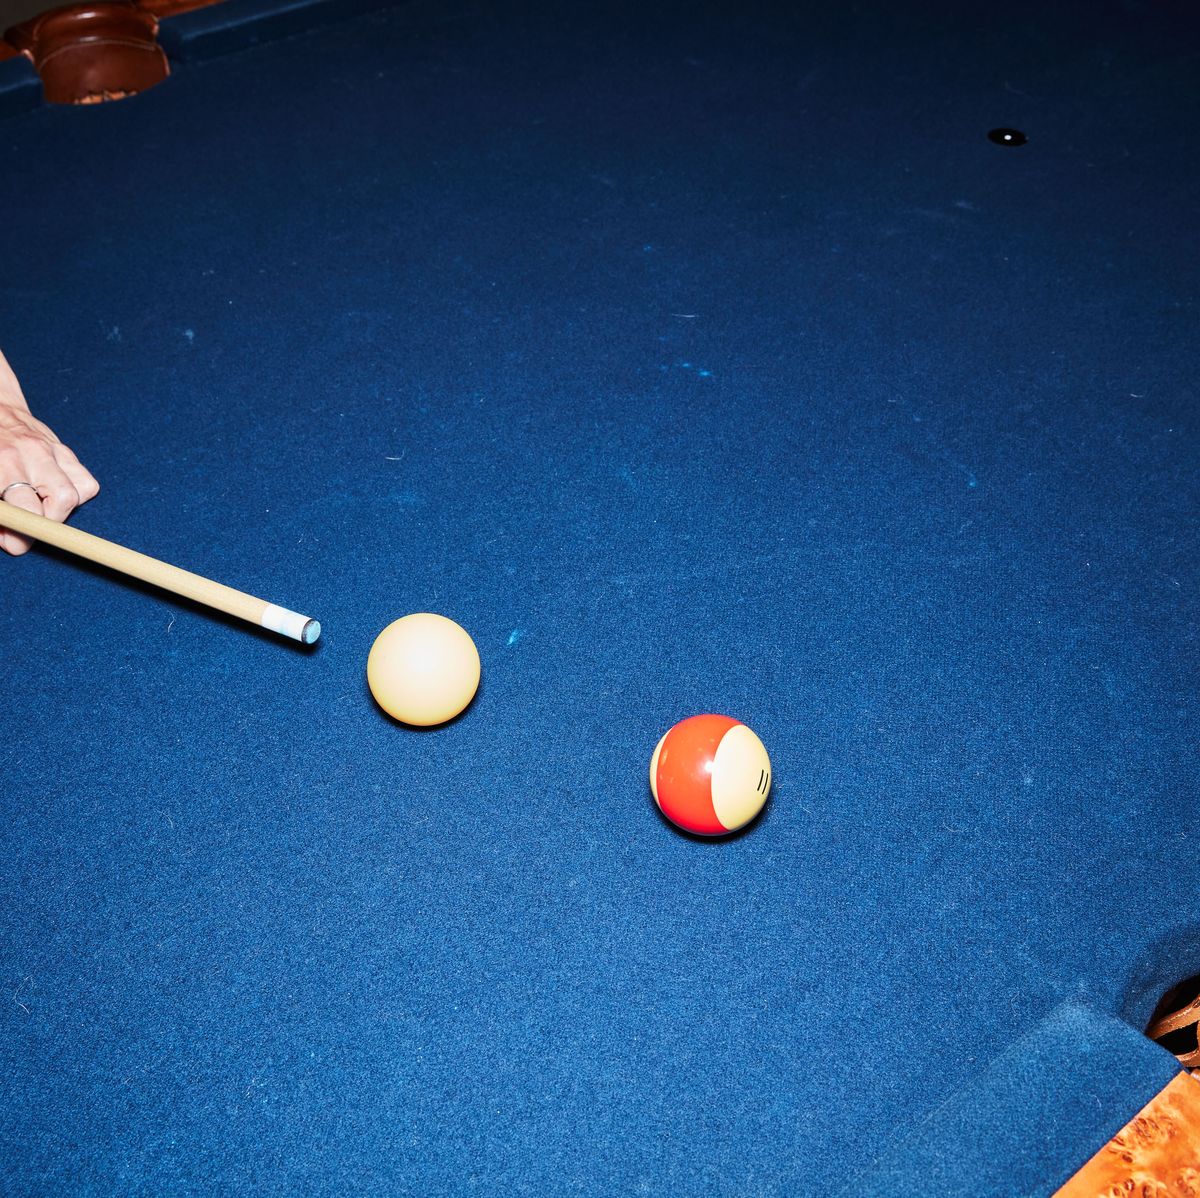 How to Use Math to Beat Your Friends at Pool